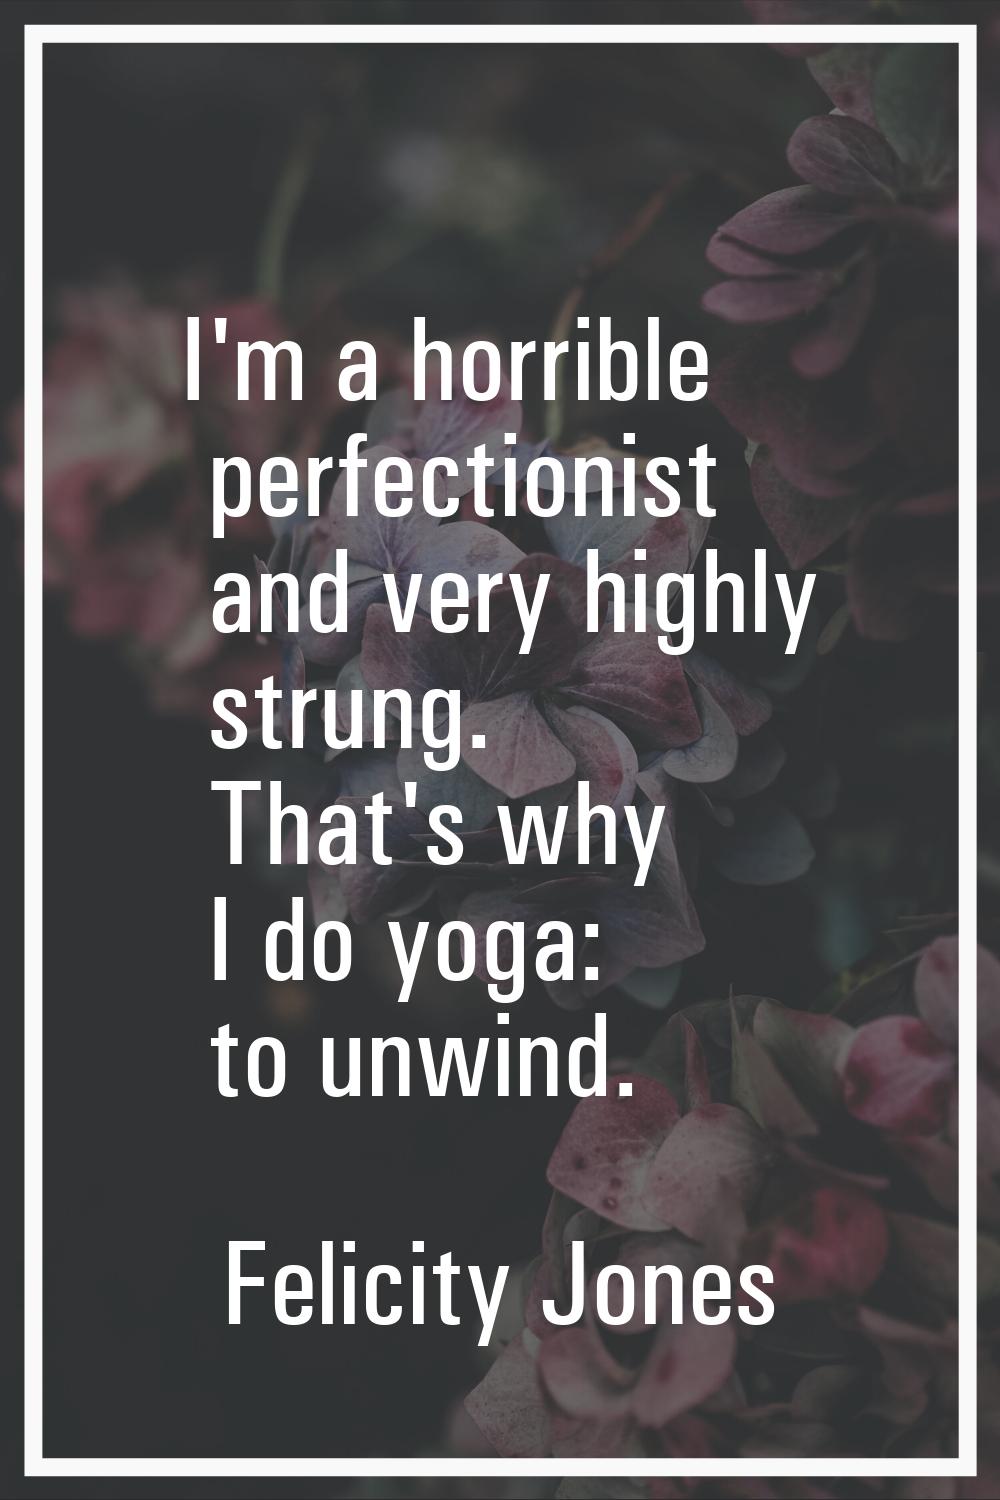 I'm a horrible perfectionist and very highly strung. That's why I do yoga: to unwind.